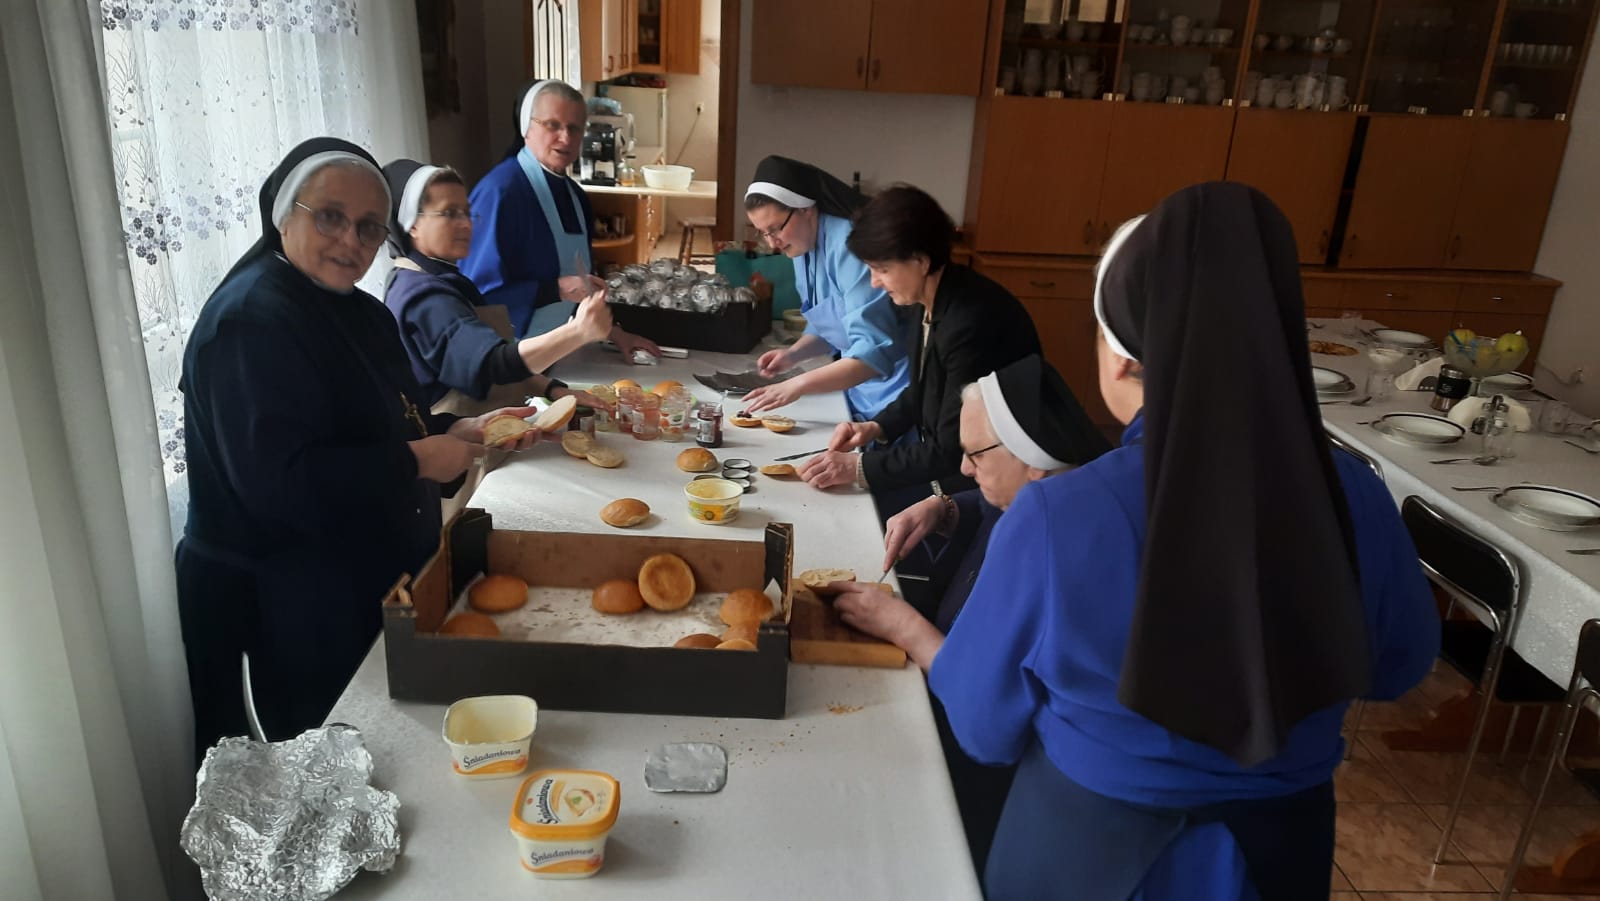 Sisters Making Food for Refugees